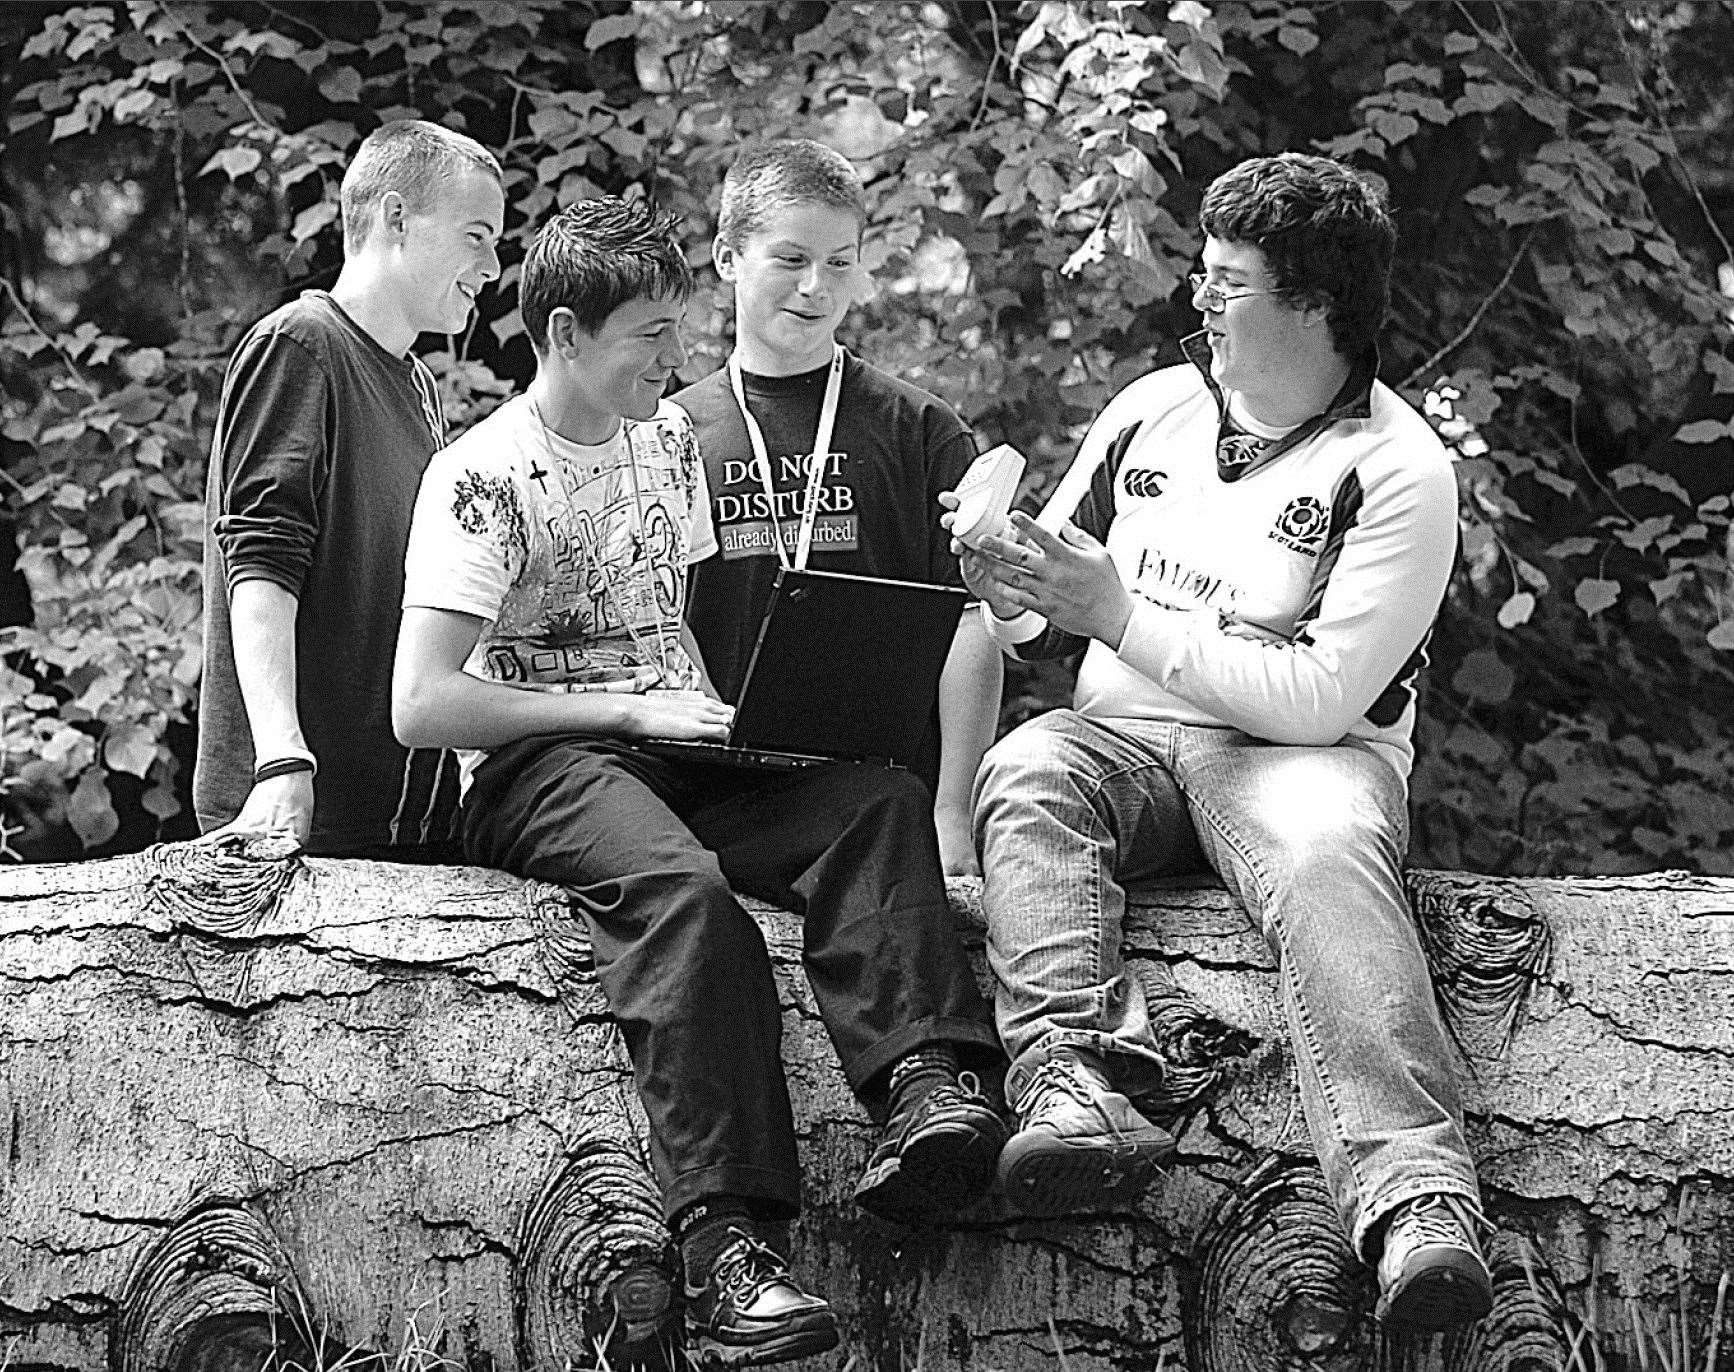 In 2005, Thurso air cadets Ross Venters, Keith Whitelaw, Brian Robertson and Jamie Munro came second in a Highland-wide ICT Youth Challenge. The group from the 1769 Squadron Air Cadets, known as Team Typhoon, impressed the judges with their presentation at the end of the gruelling five-day 'hot house' final.